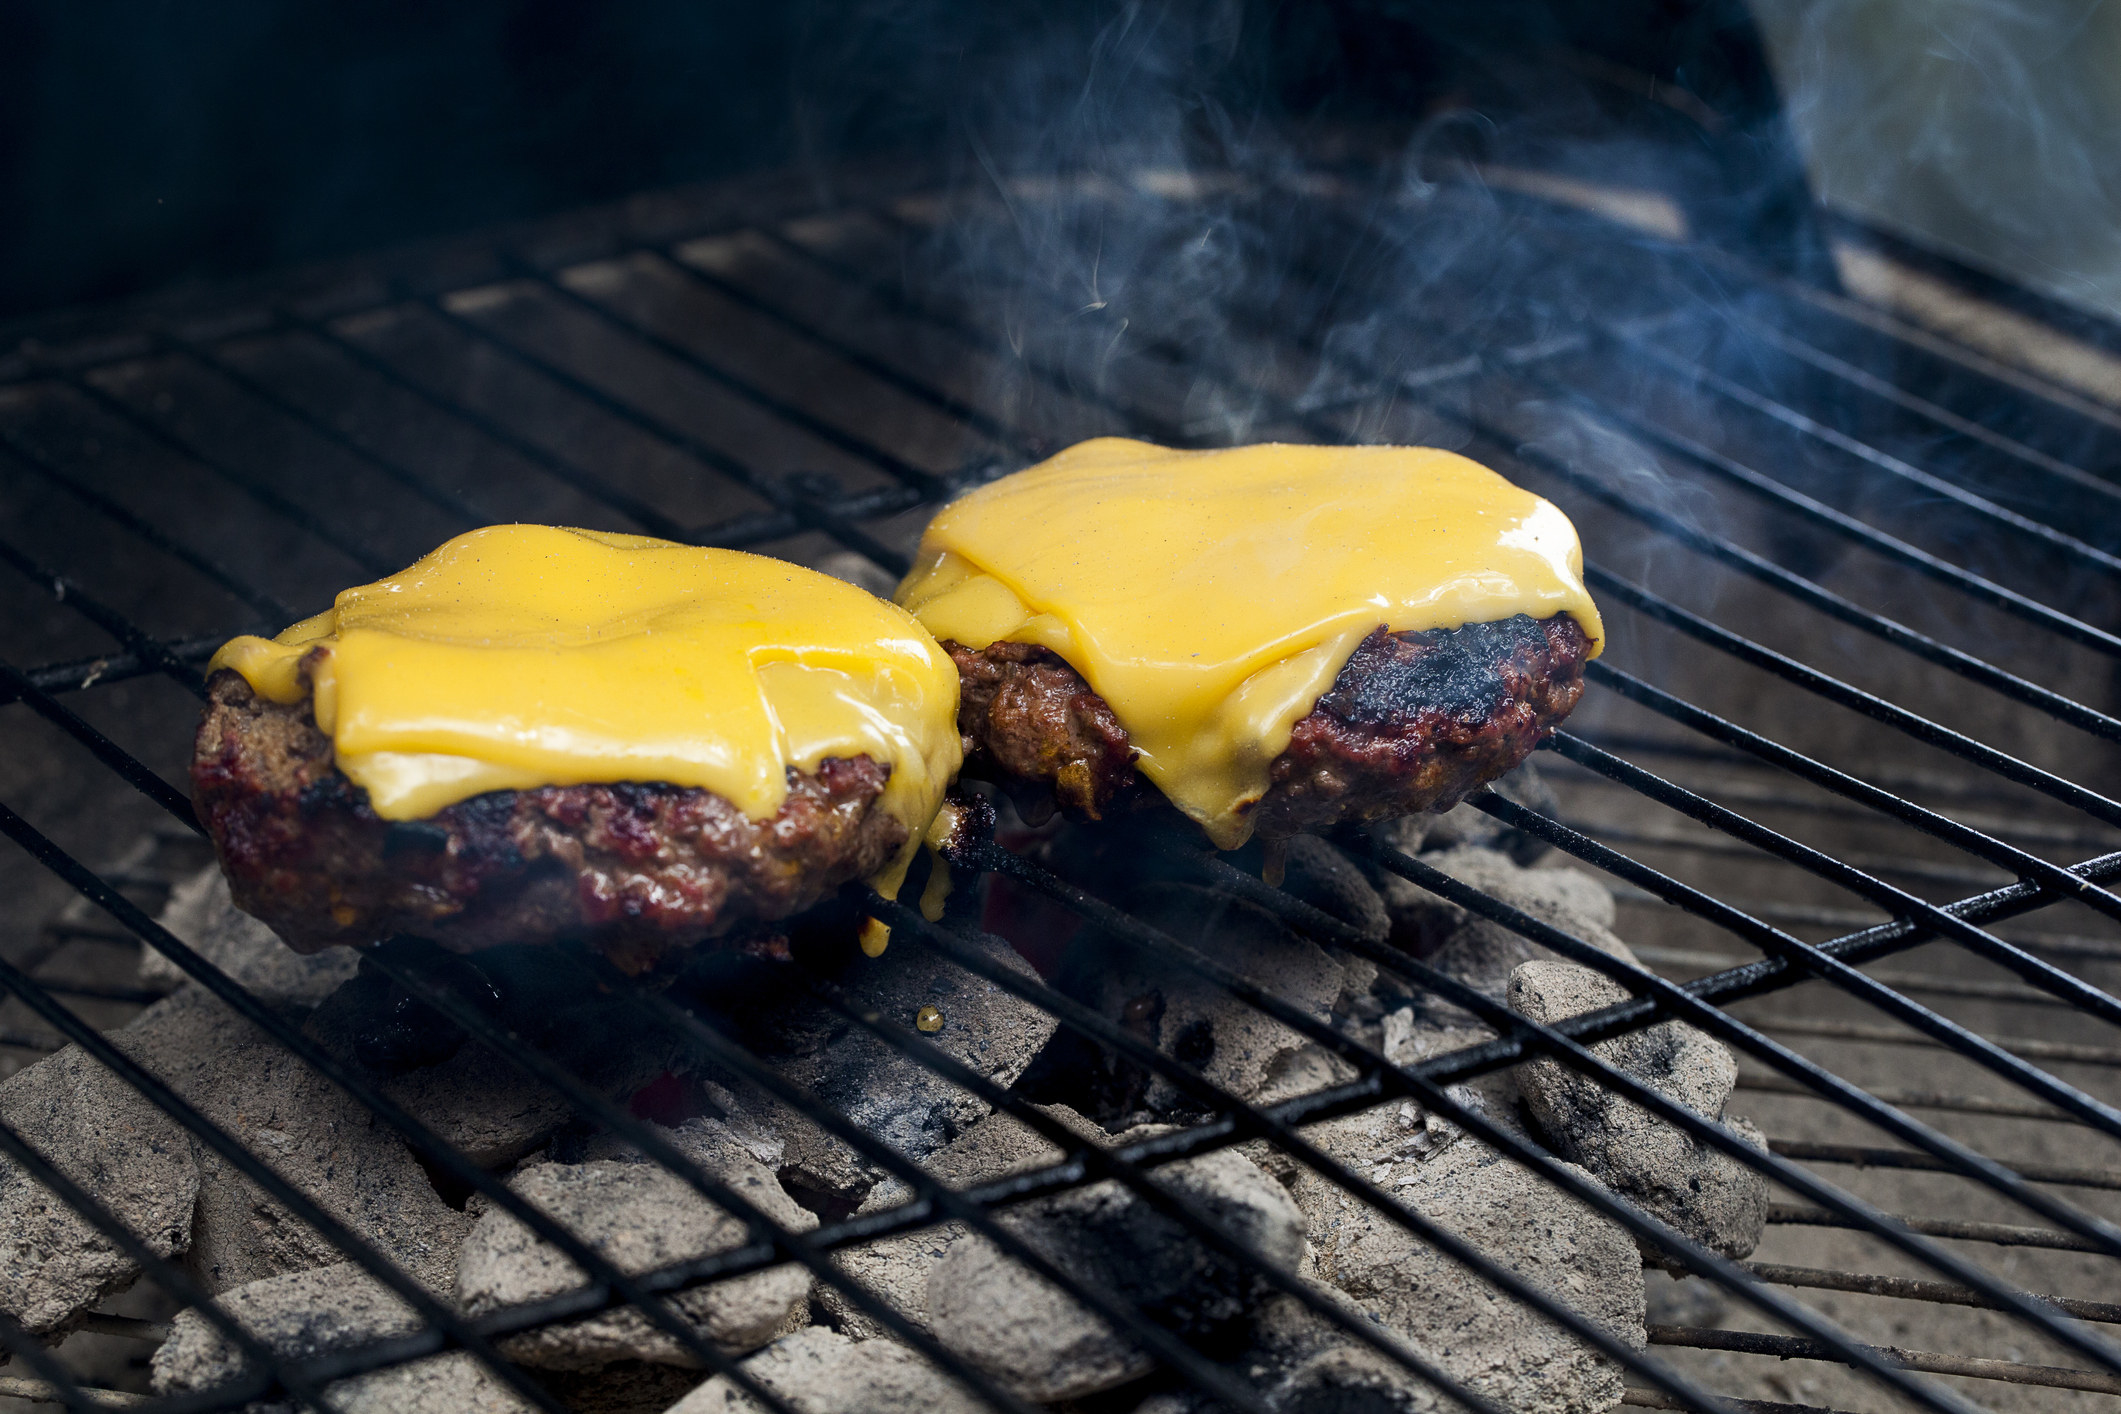 Two cheeseburgers on the grill.